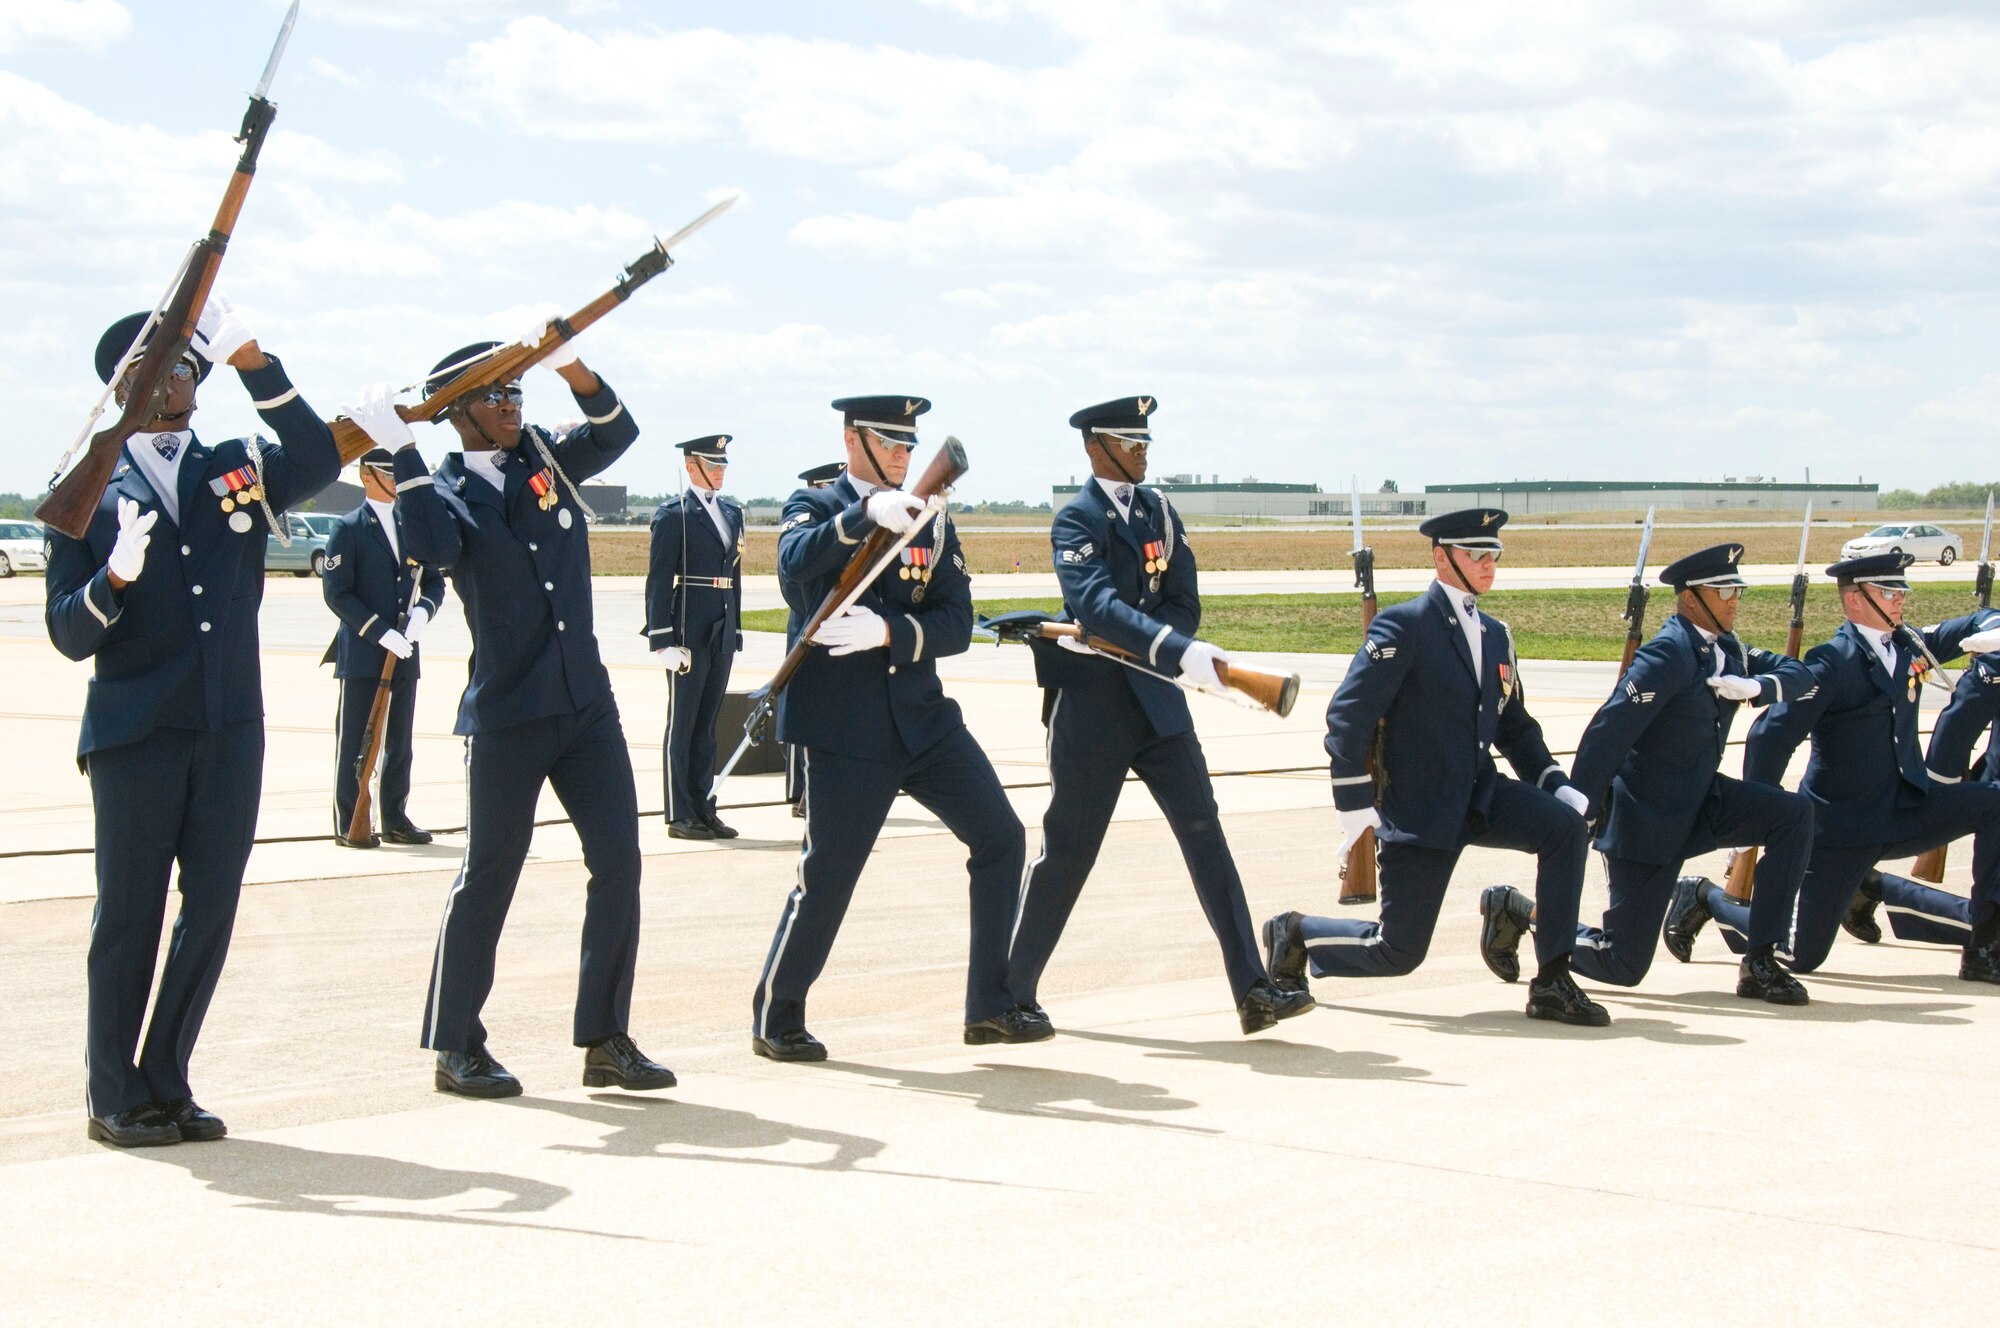 The U.S. Air Force Honor Guard Drill Team performs during the Thunder Over the Blue Ridge Open House and Air Show. The 167th Airlift Wing, West Virginia Air National Guard unit in Martinsburg, WV held an open house in conjuction with the Thunder Over the Blue Ridge Air Show on September 4 and 5, 2010. The U.S. Air Force Thunderbirds and the U.S. Army Golden Knights headlined the show. (U.S. Air Force photo by MSgt Emily Beightol-Deyerle)